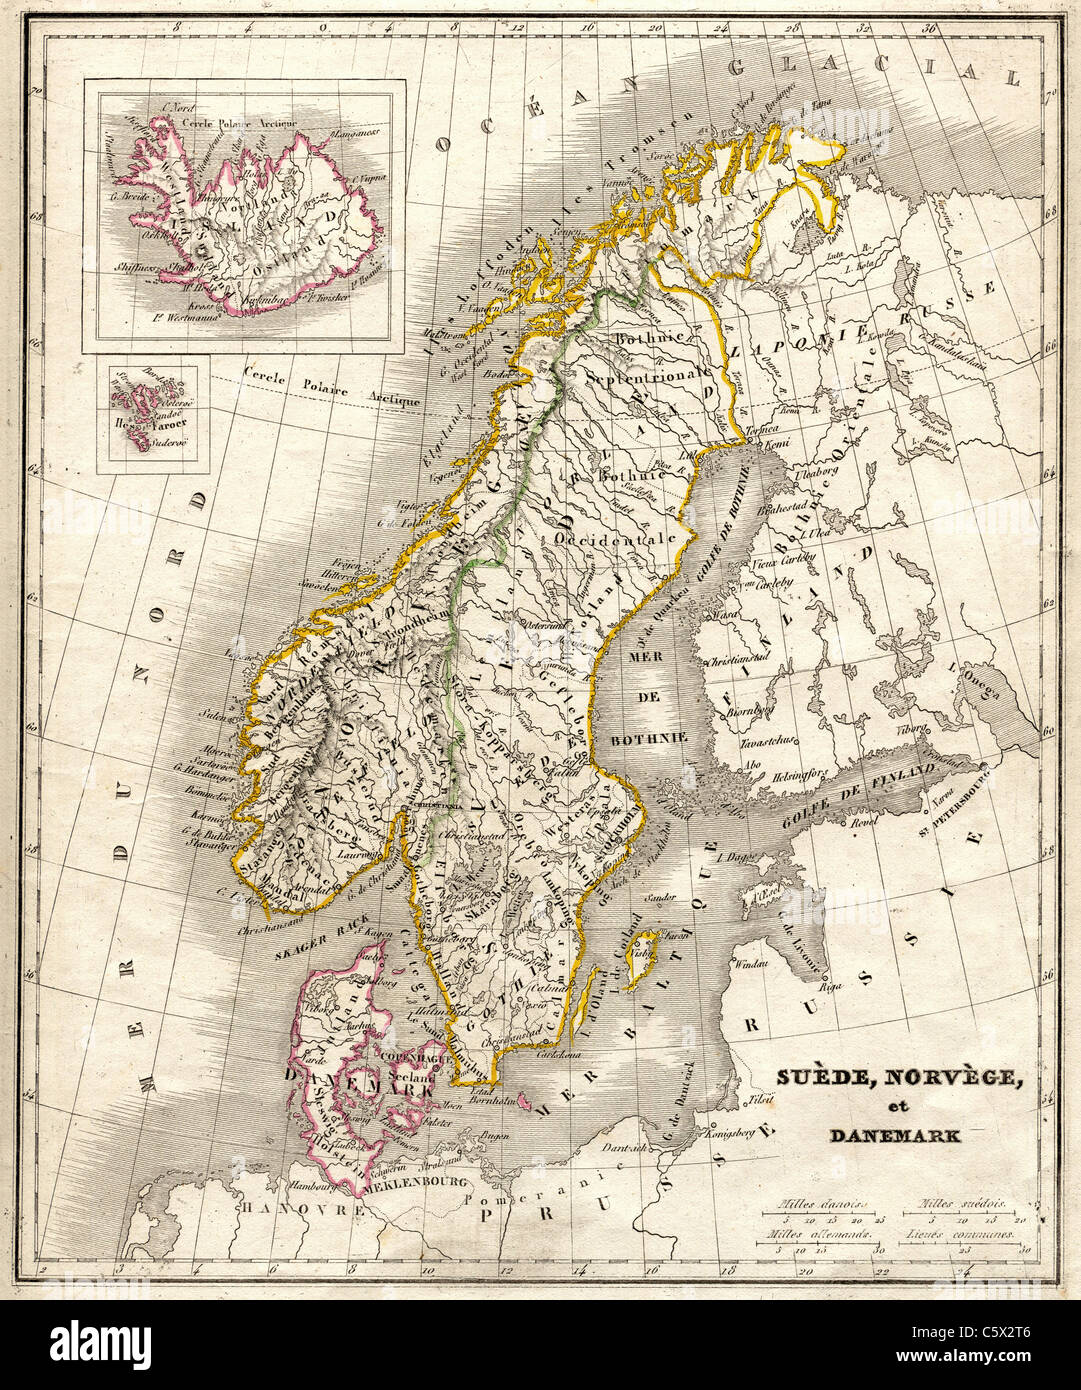 Suede, Norvege, et Danemark (Sweden, Norway, and Denmark)Antiquarian Map from 'Atlas Universel de Geographie Ancienne and Moderne' by C.V. Monin Stock Photo